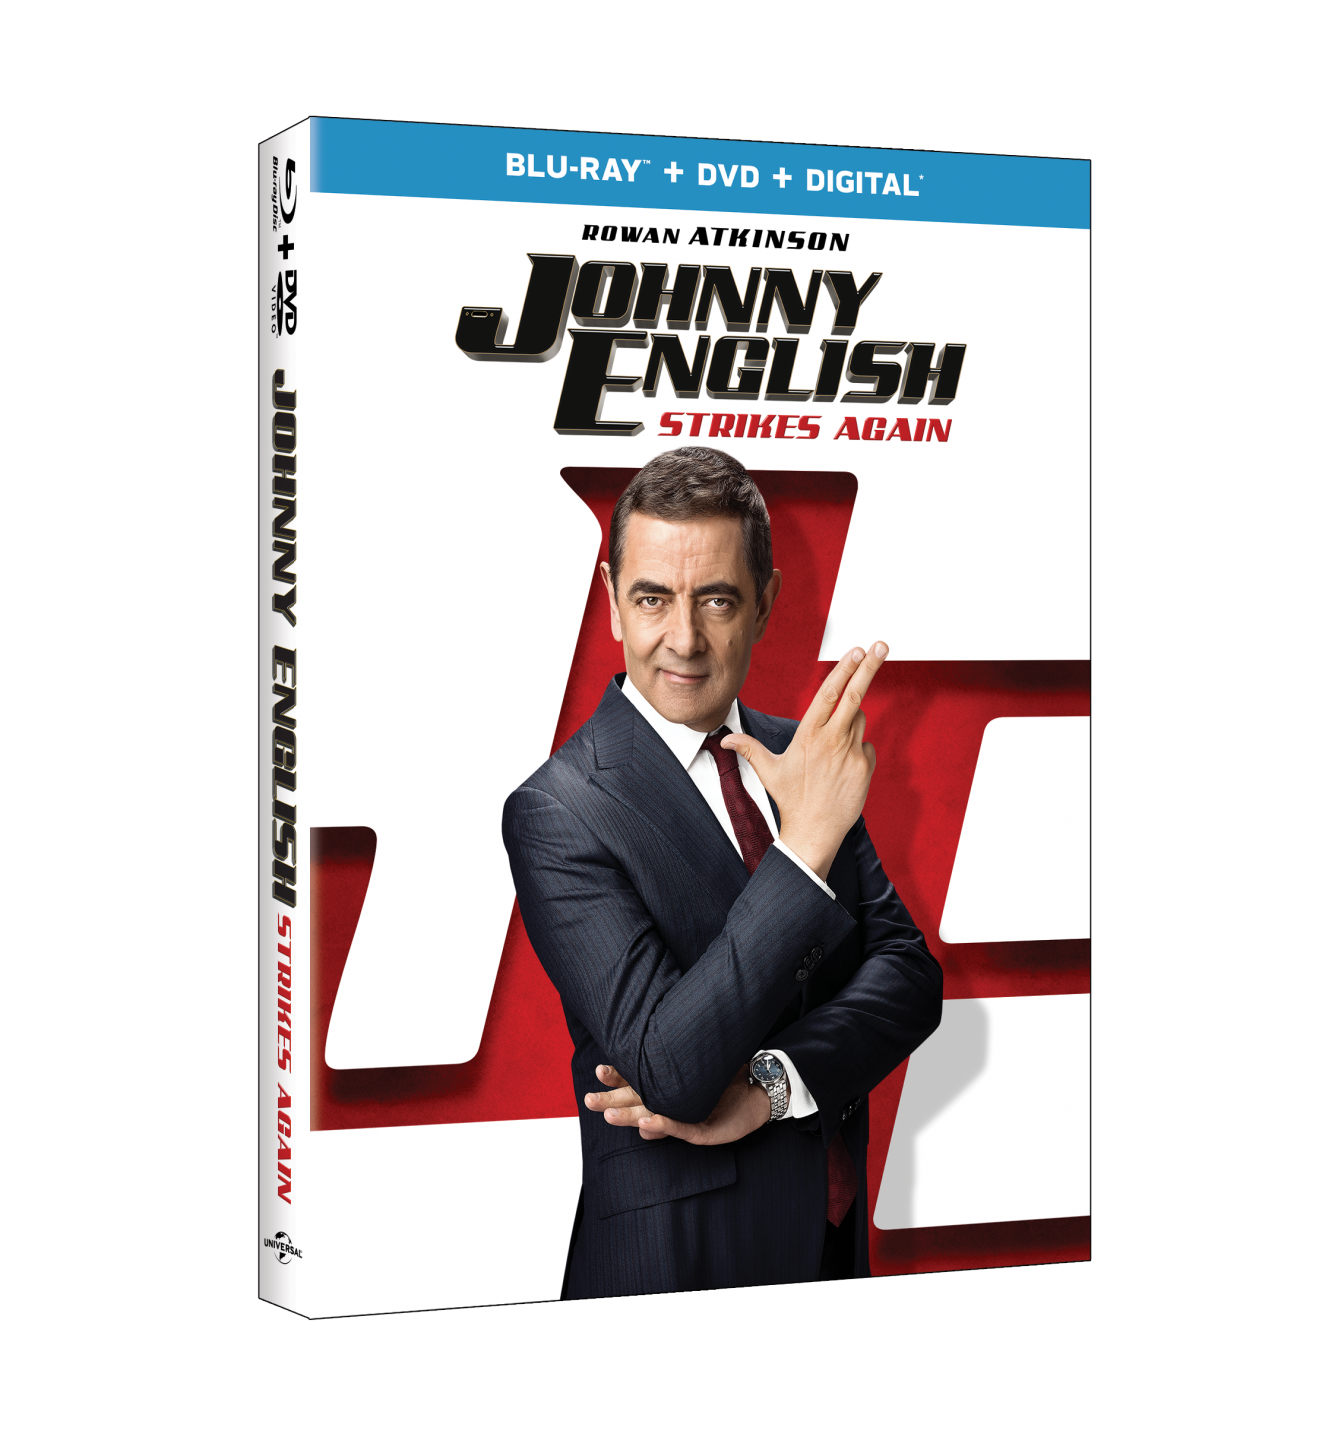 Johnny English Strikes Again Blu-Ray Combo Pack cover (Universal Pictures Home Entertainment)